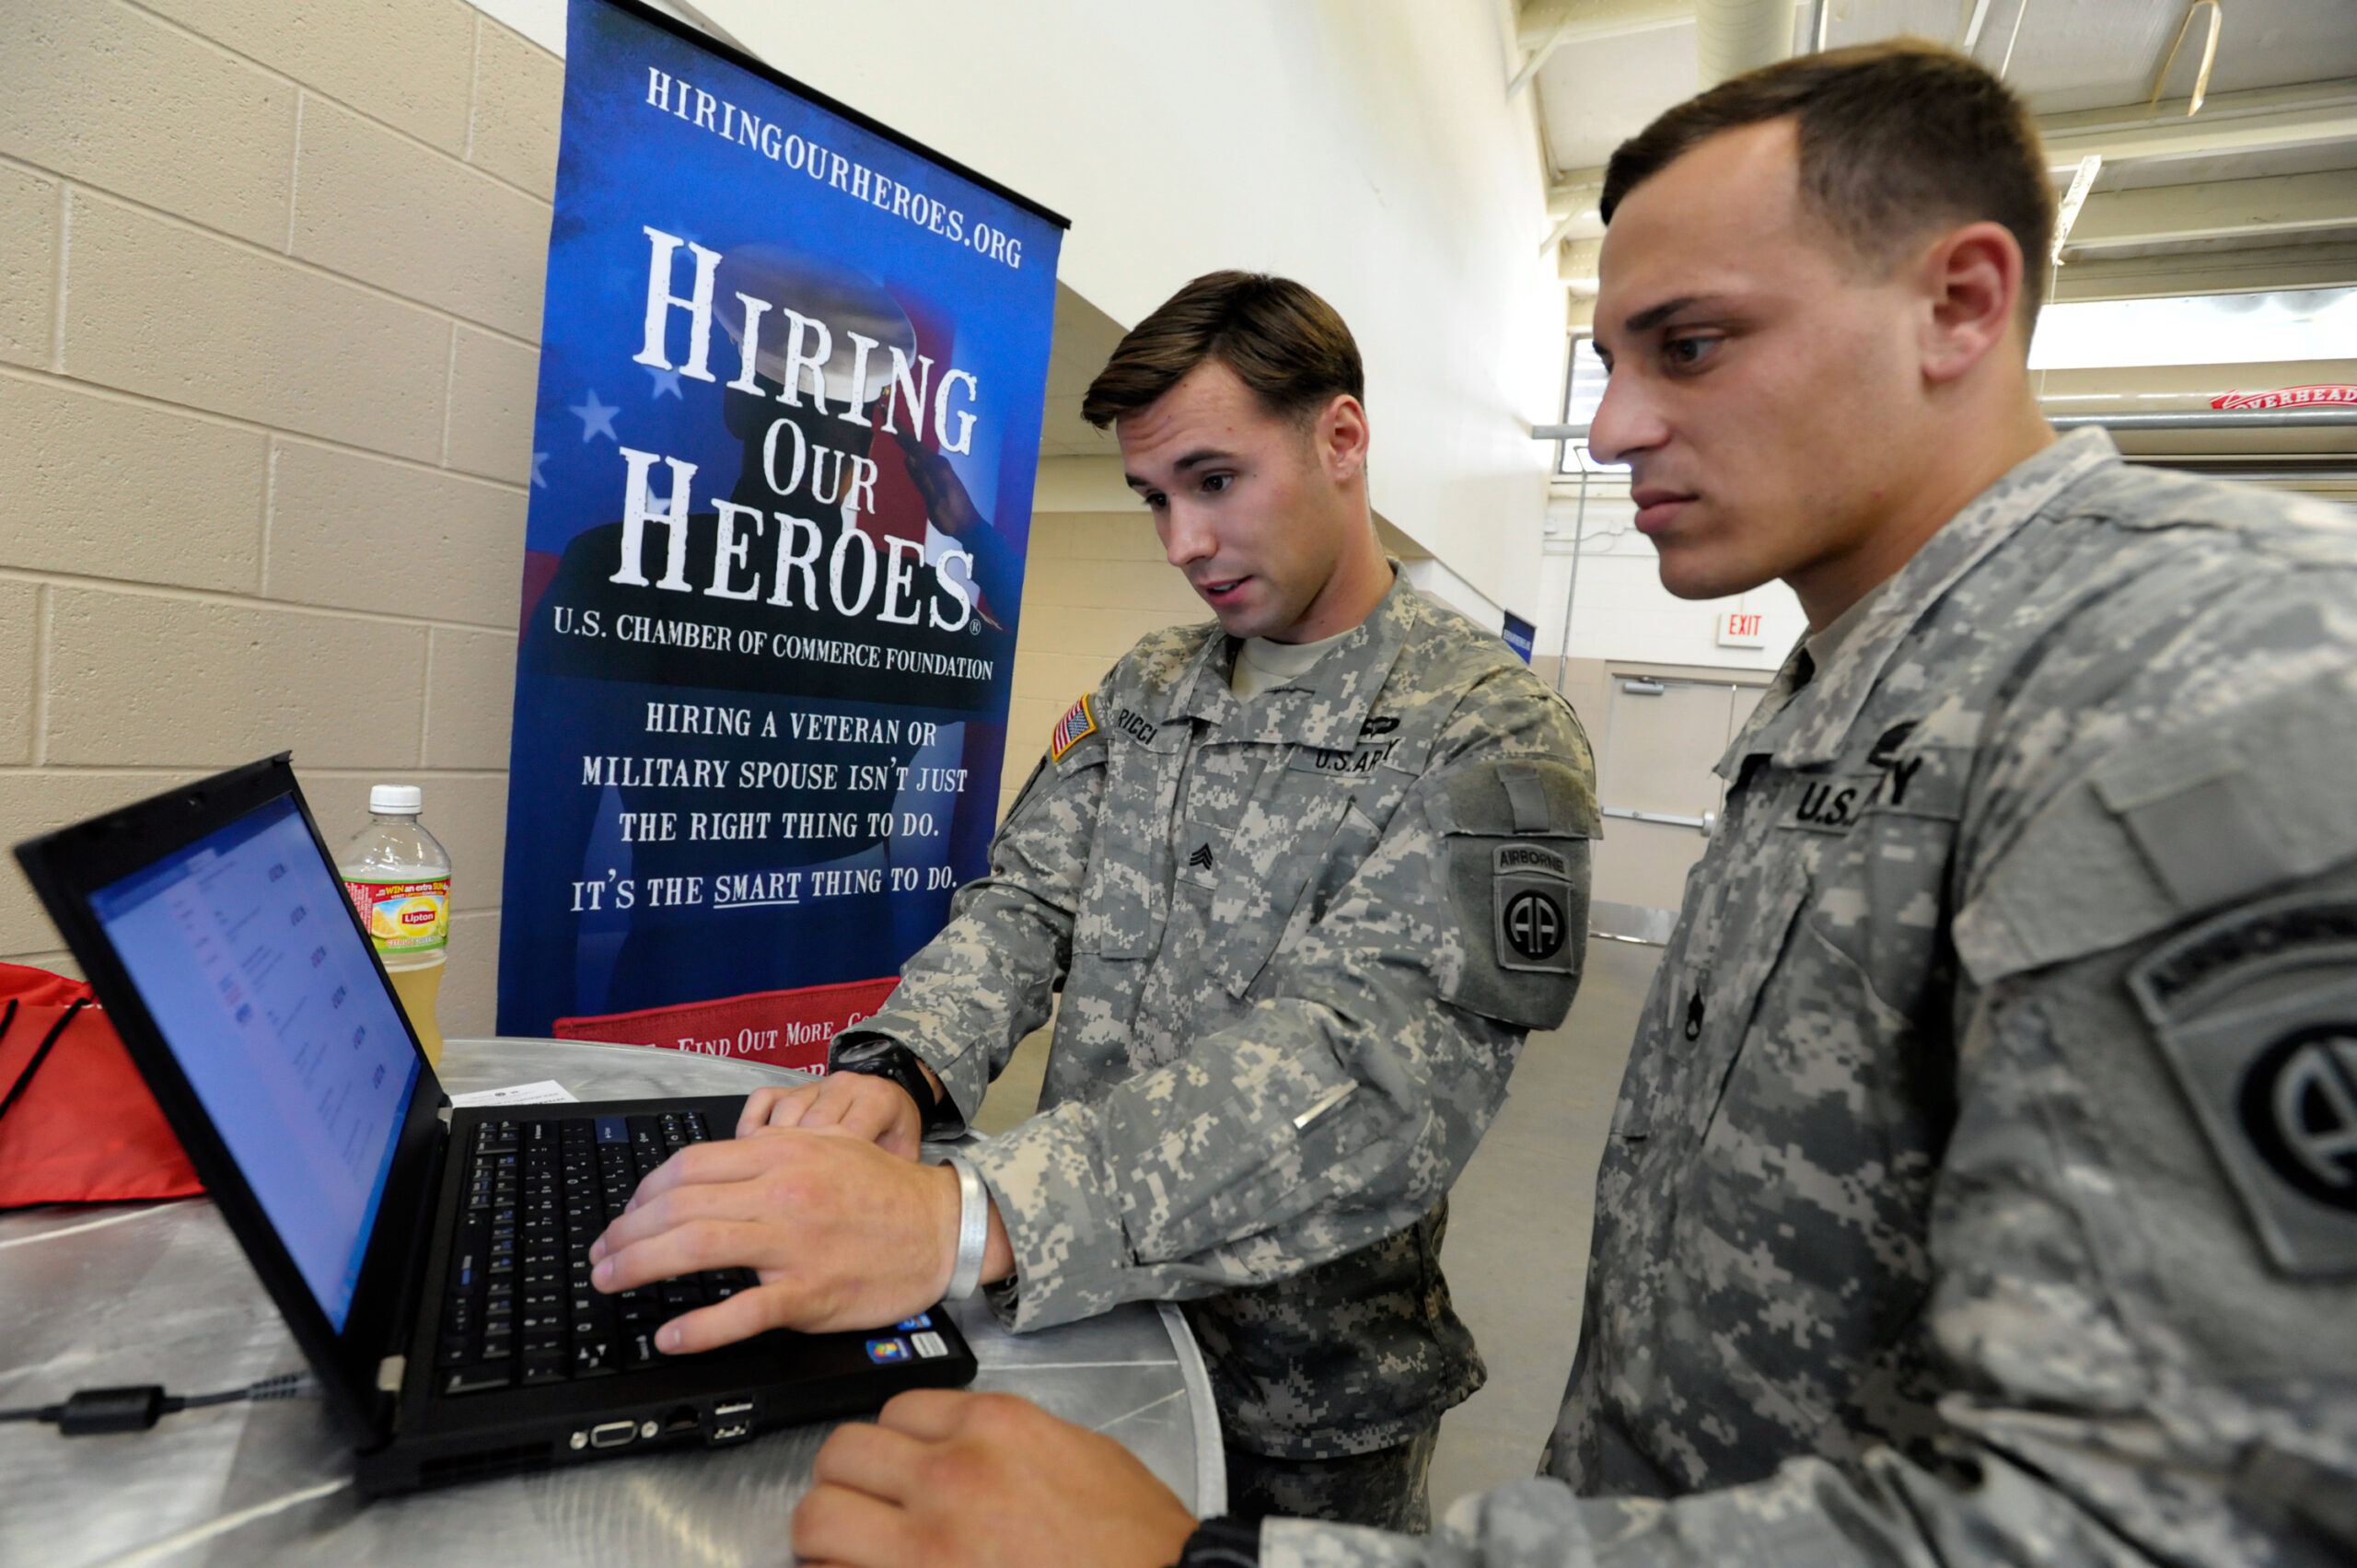 Veterans at a Hiring Our Heroes event